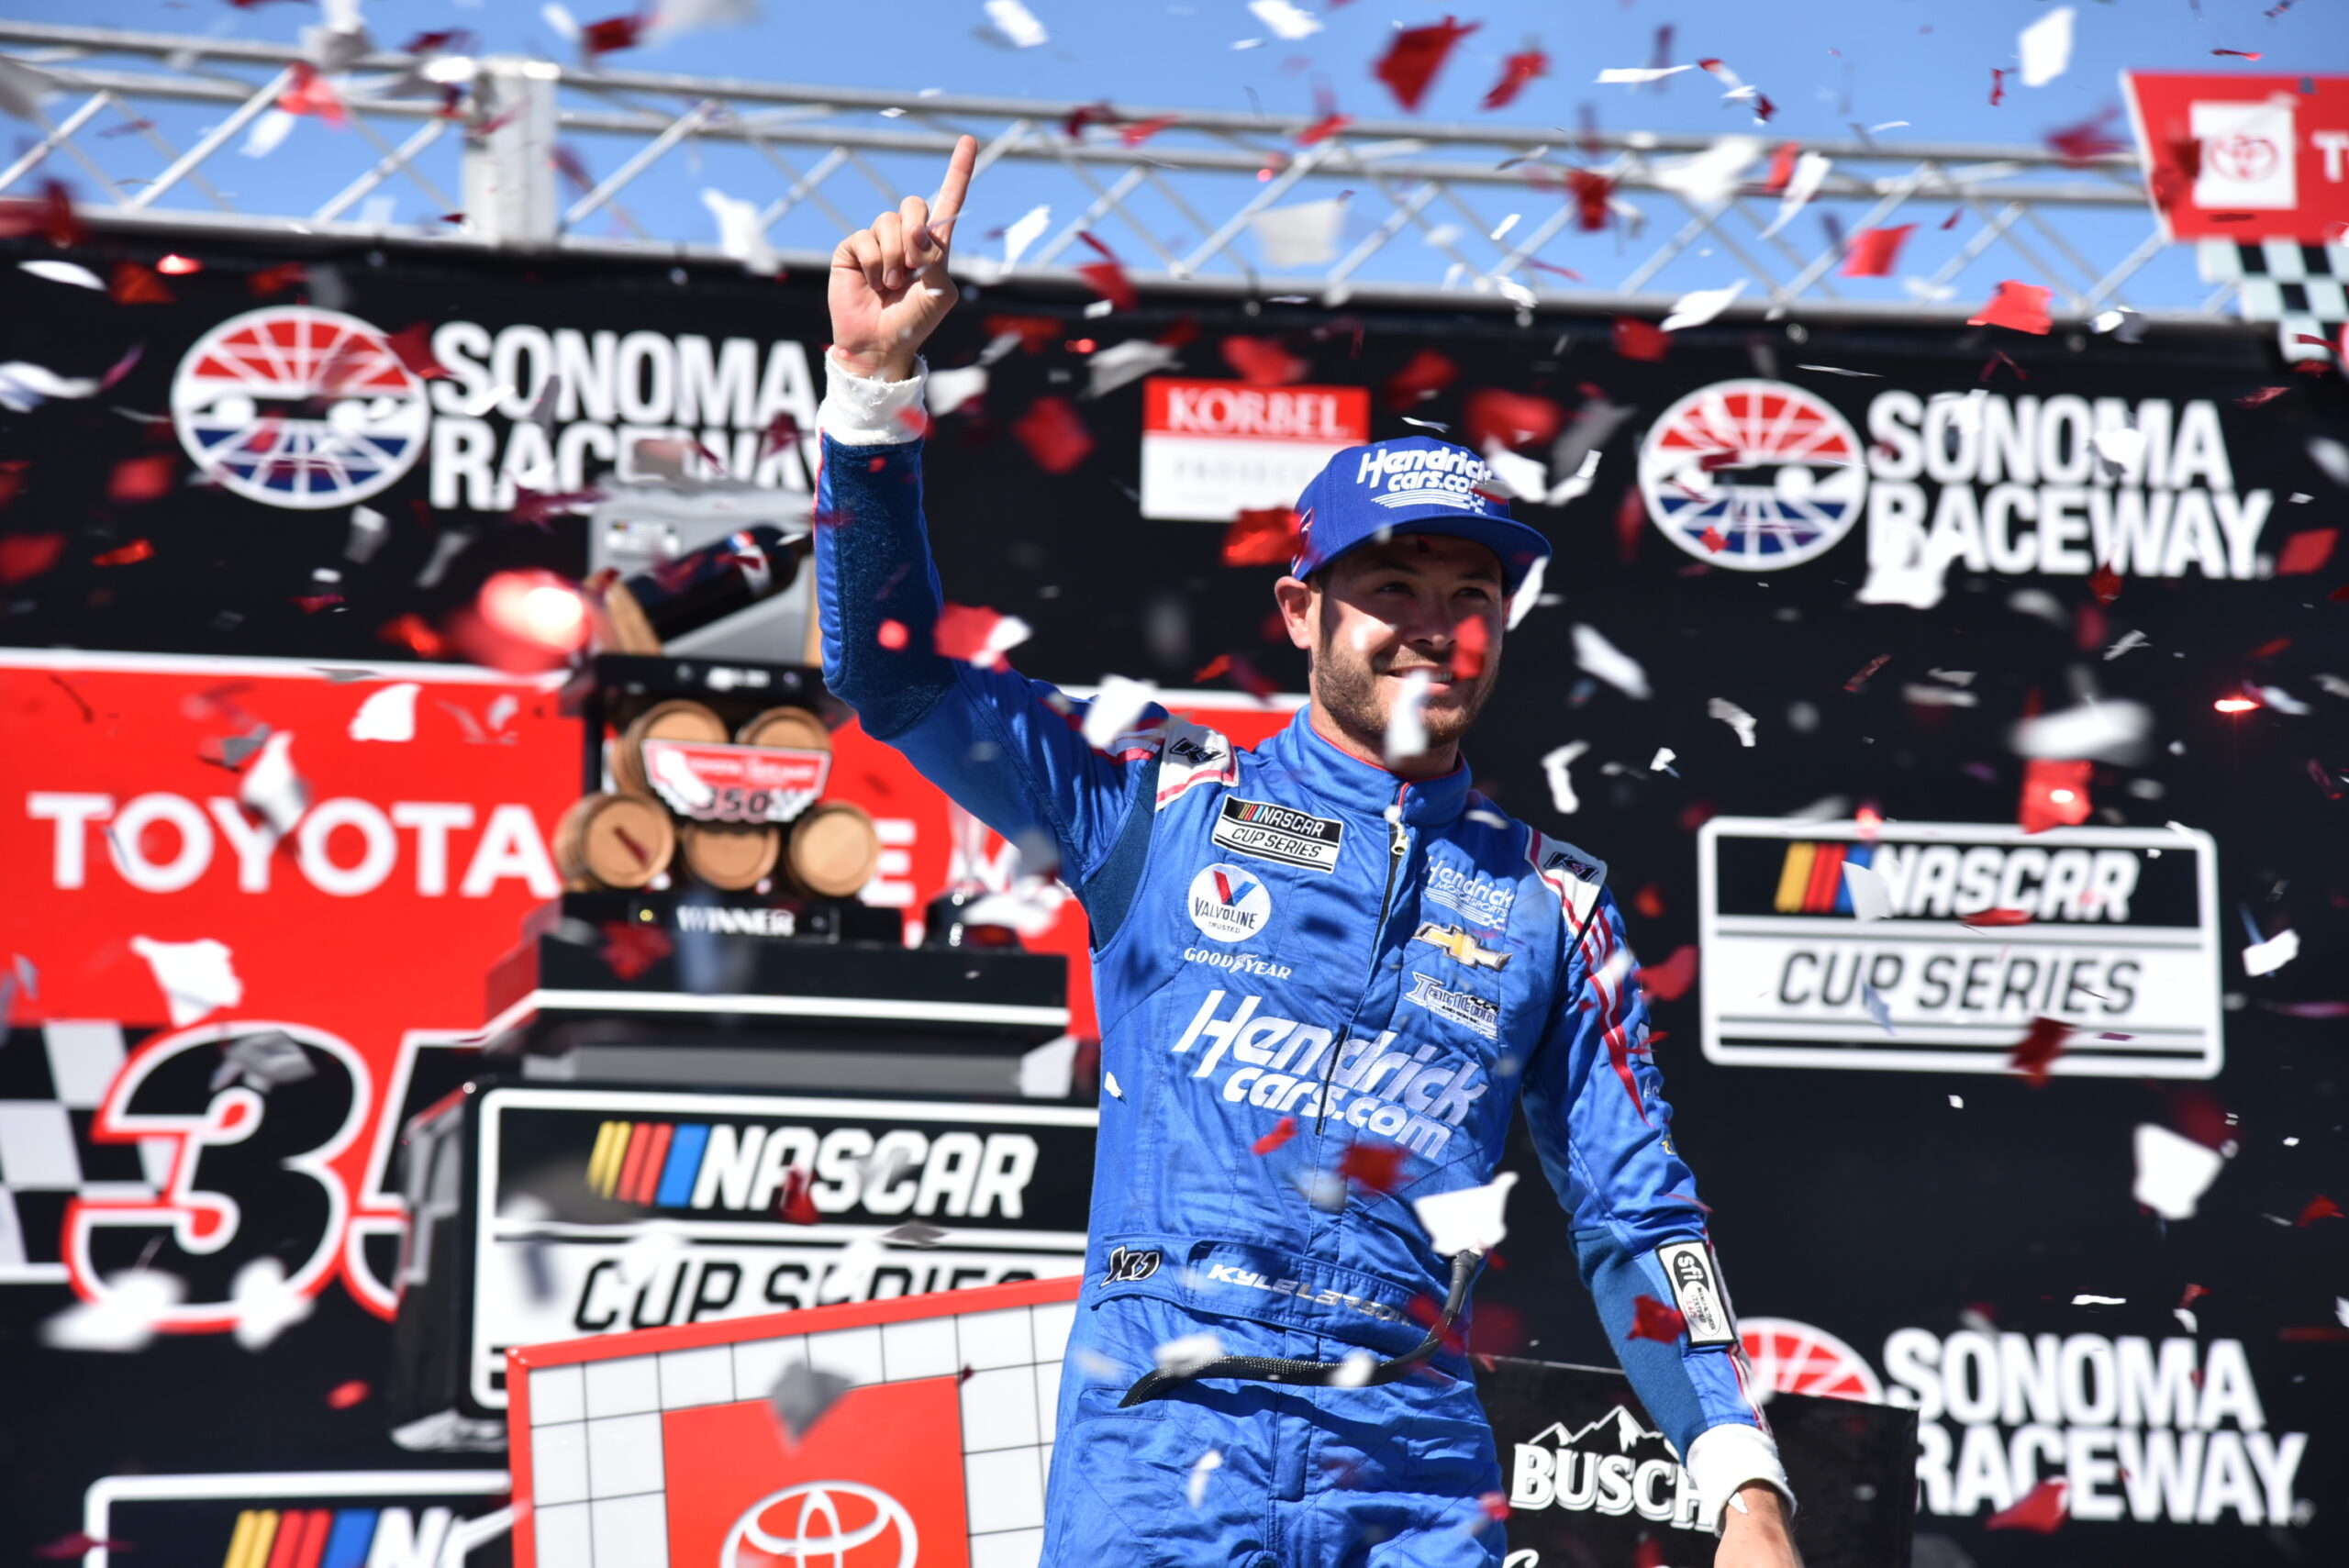 Quickly, Kyle Larson's Sonoma win bolsters his championship bid in 2021. (Photo: Luis Torres/The Podium Finish)